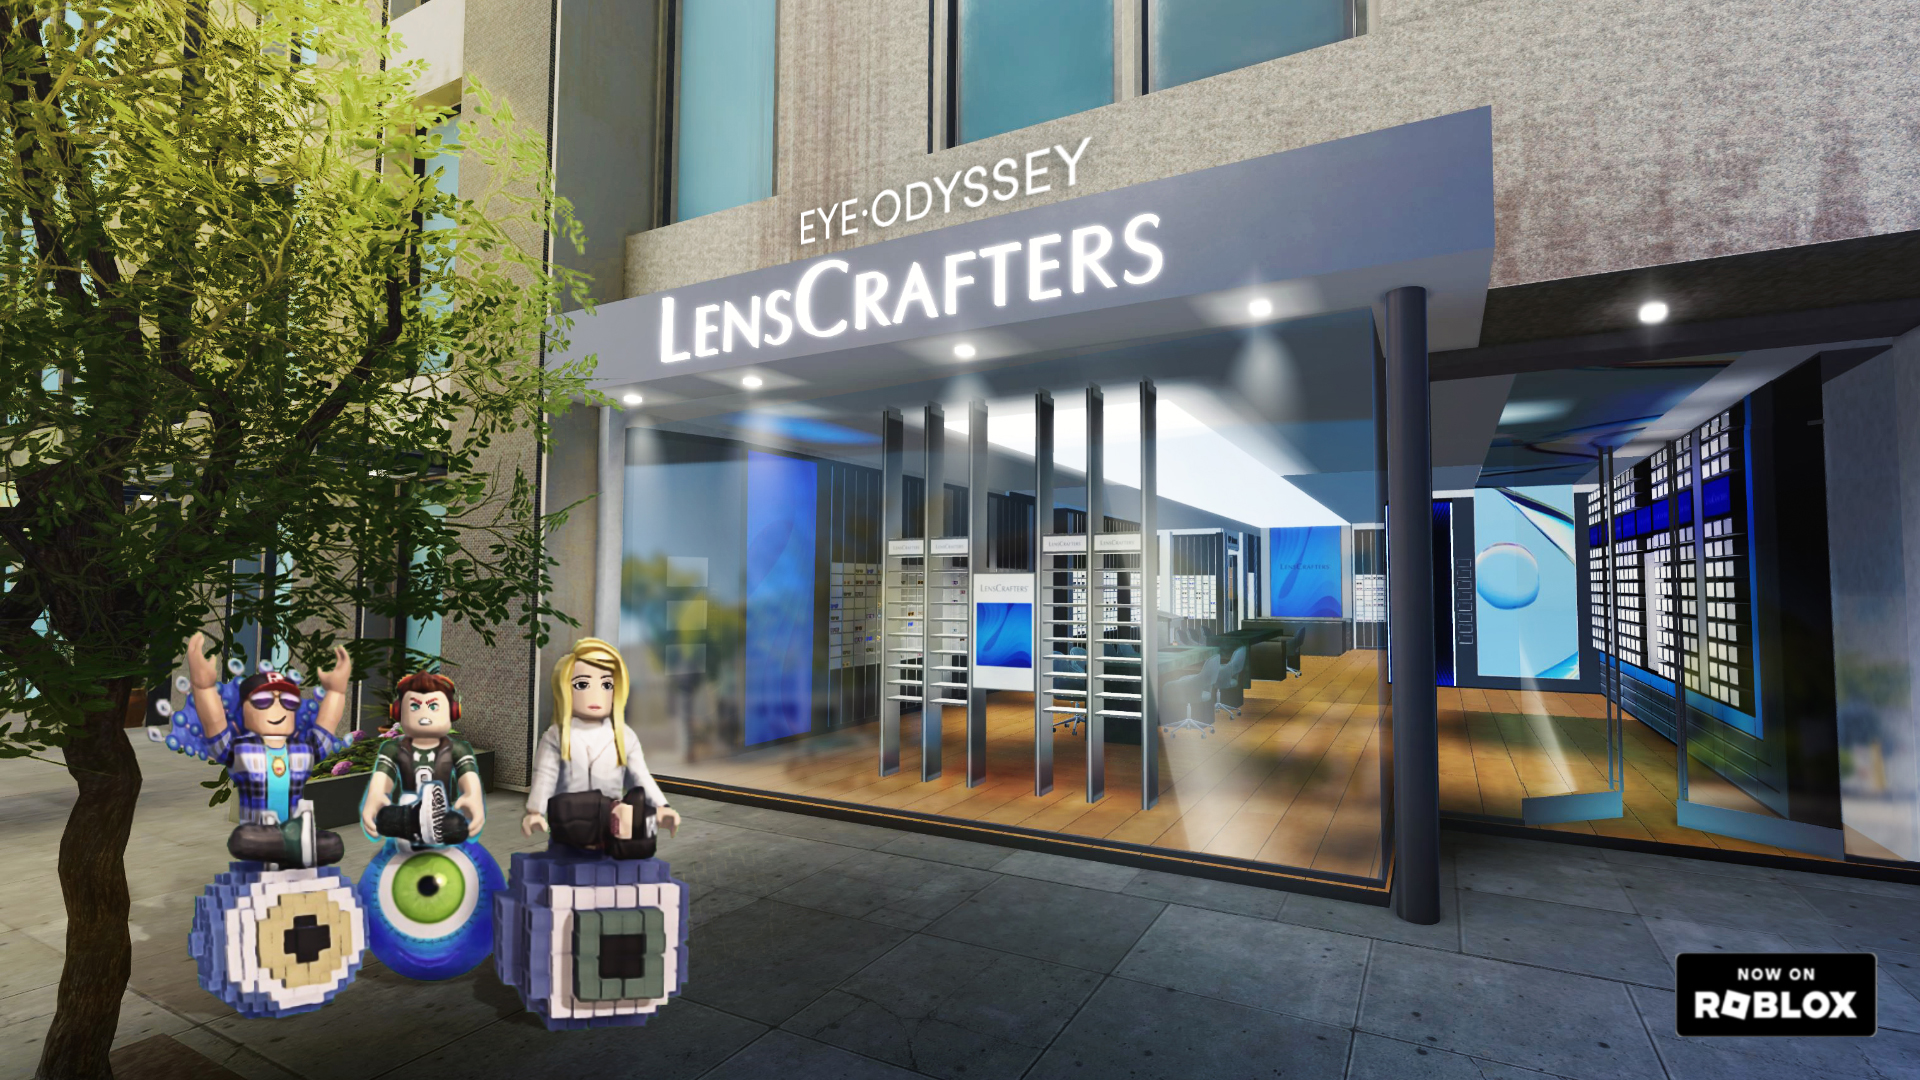 LensCrafters Creates Its Own Immersive Experience on Roblox to Drive Awareness on Proper Vision Health